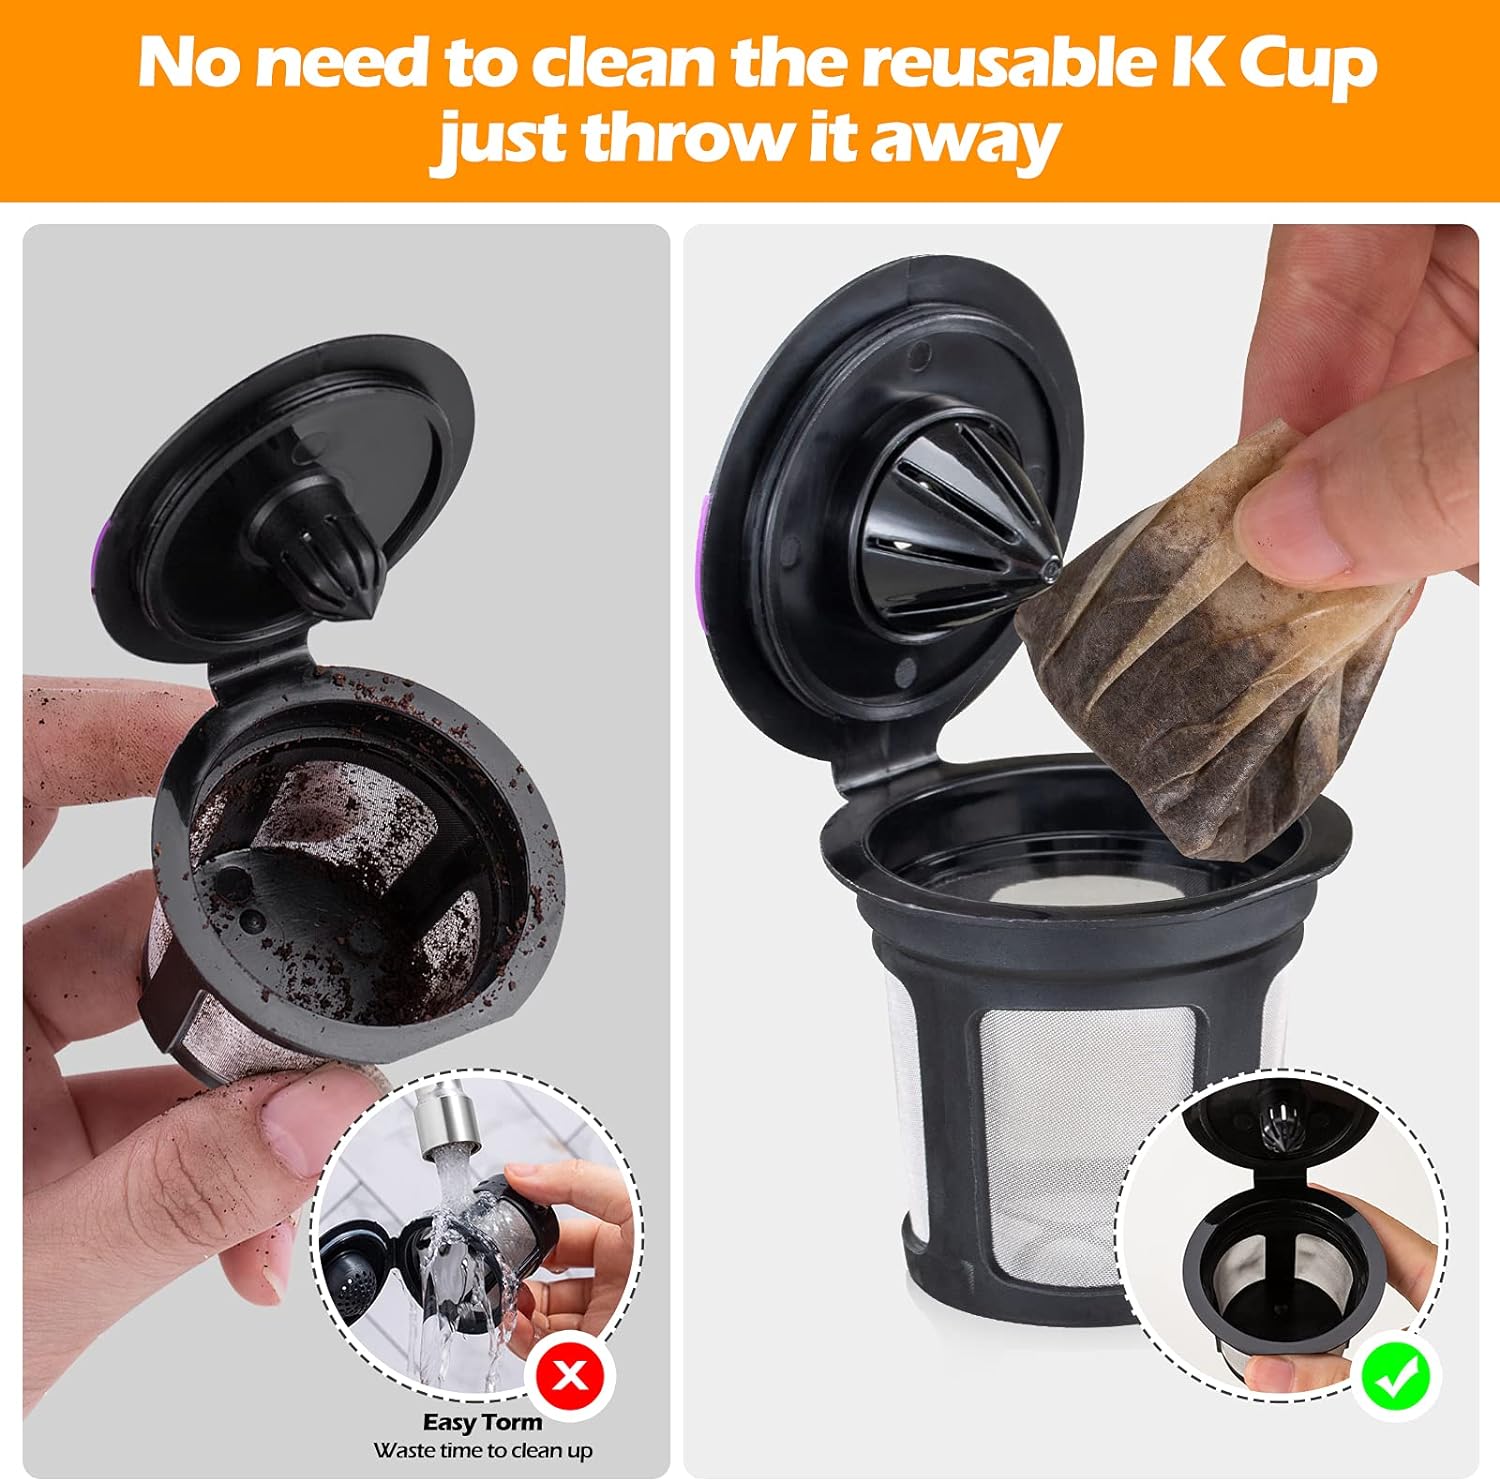 Reusable K Cups for Keurig, 6 Pack K Cup Reusable Coffee Pods with BPA Free Plastic, Refillable K Cup Coffe Pods with 304 Mess, Compatible for Keurig 1.0  2.0 Brewers (6-pack)